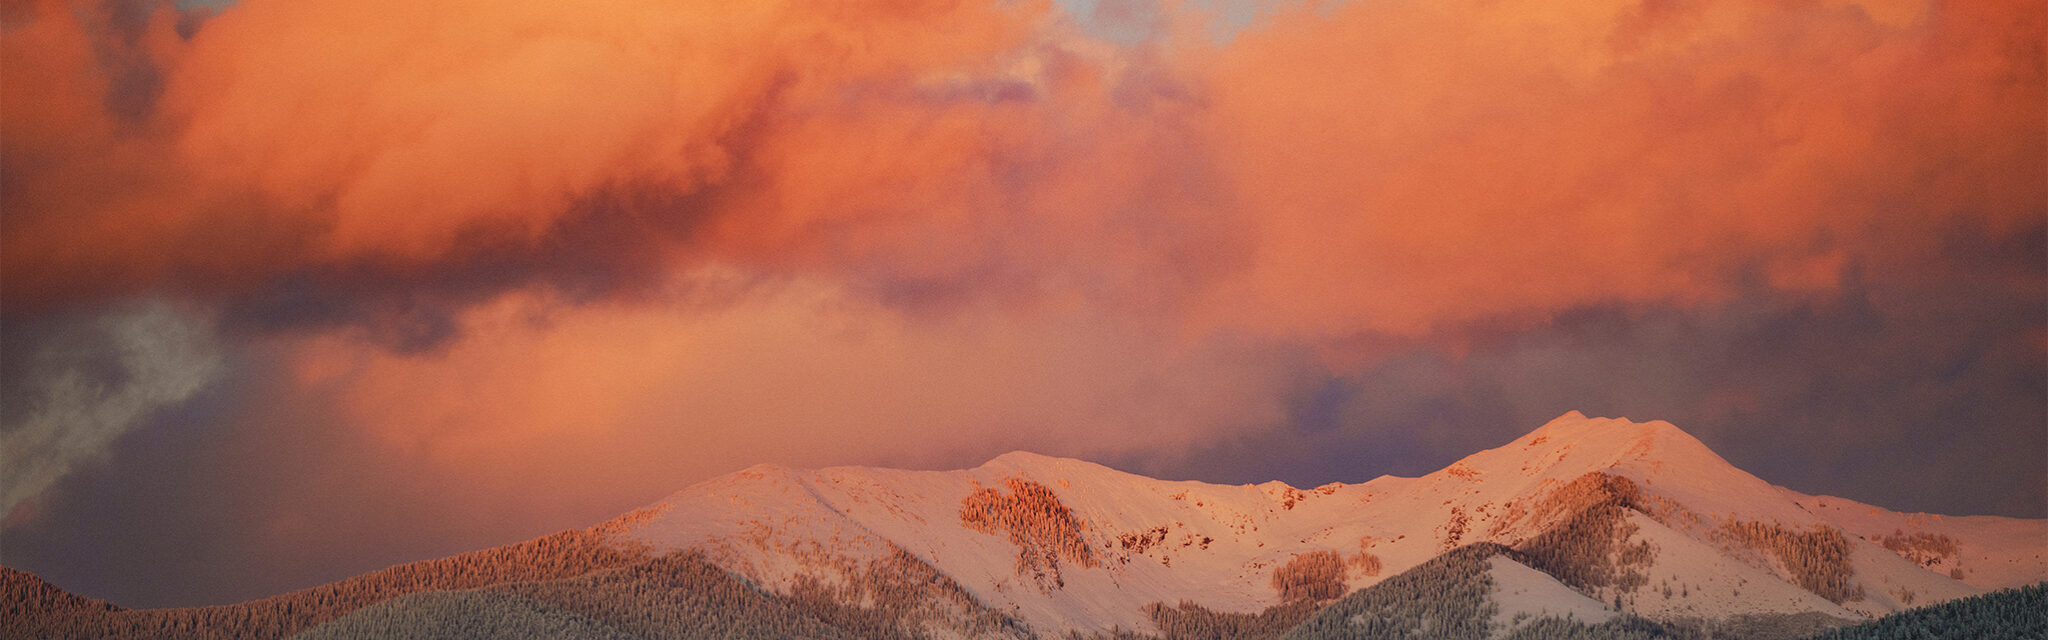 Alpenglow sets in across snow covered mountains and a large embankment of clouds.